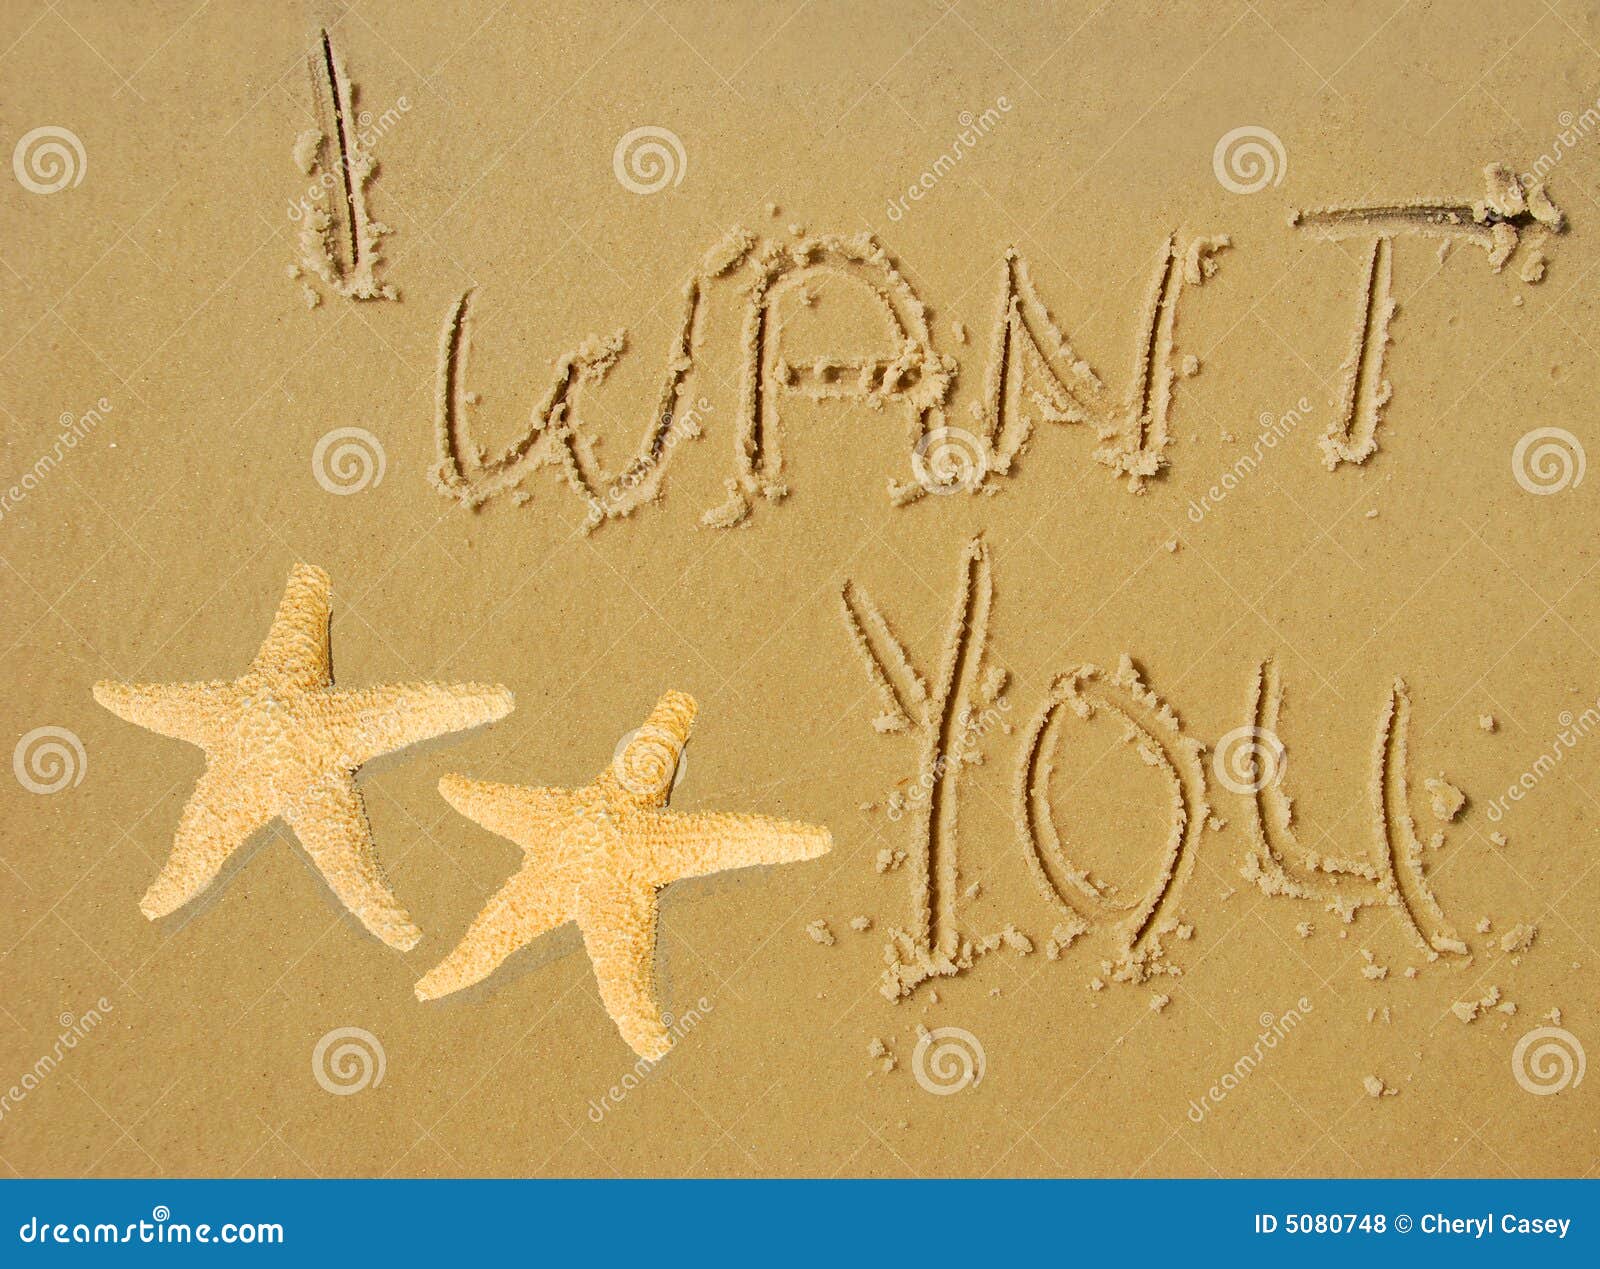 i want you written in sand